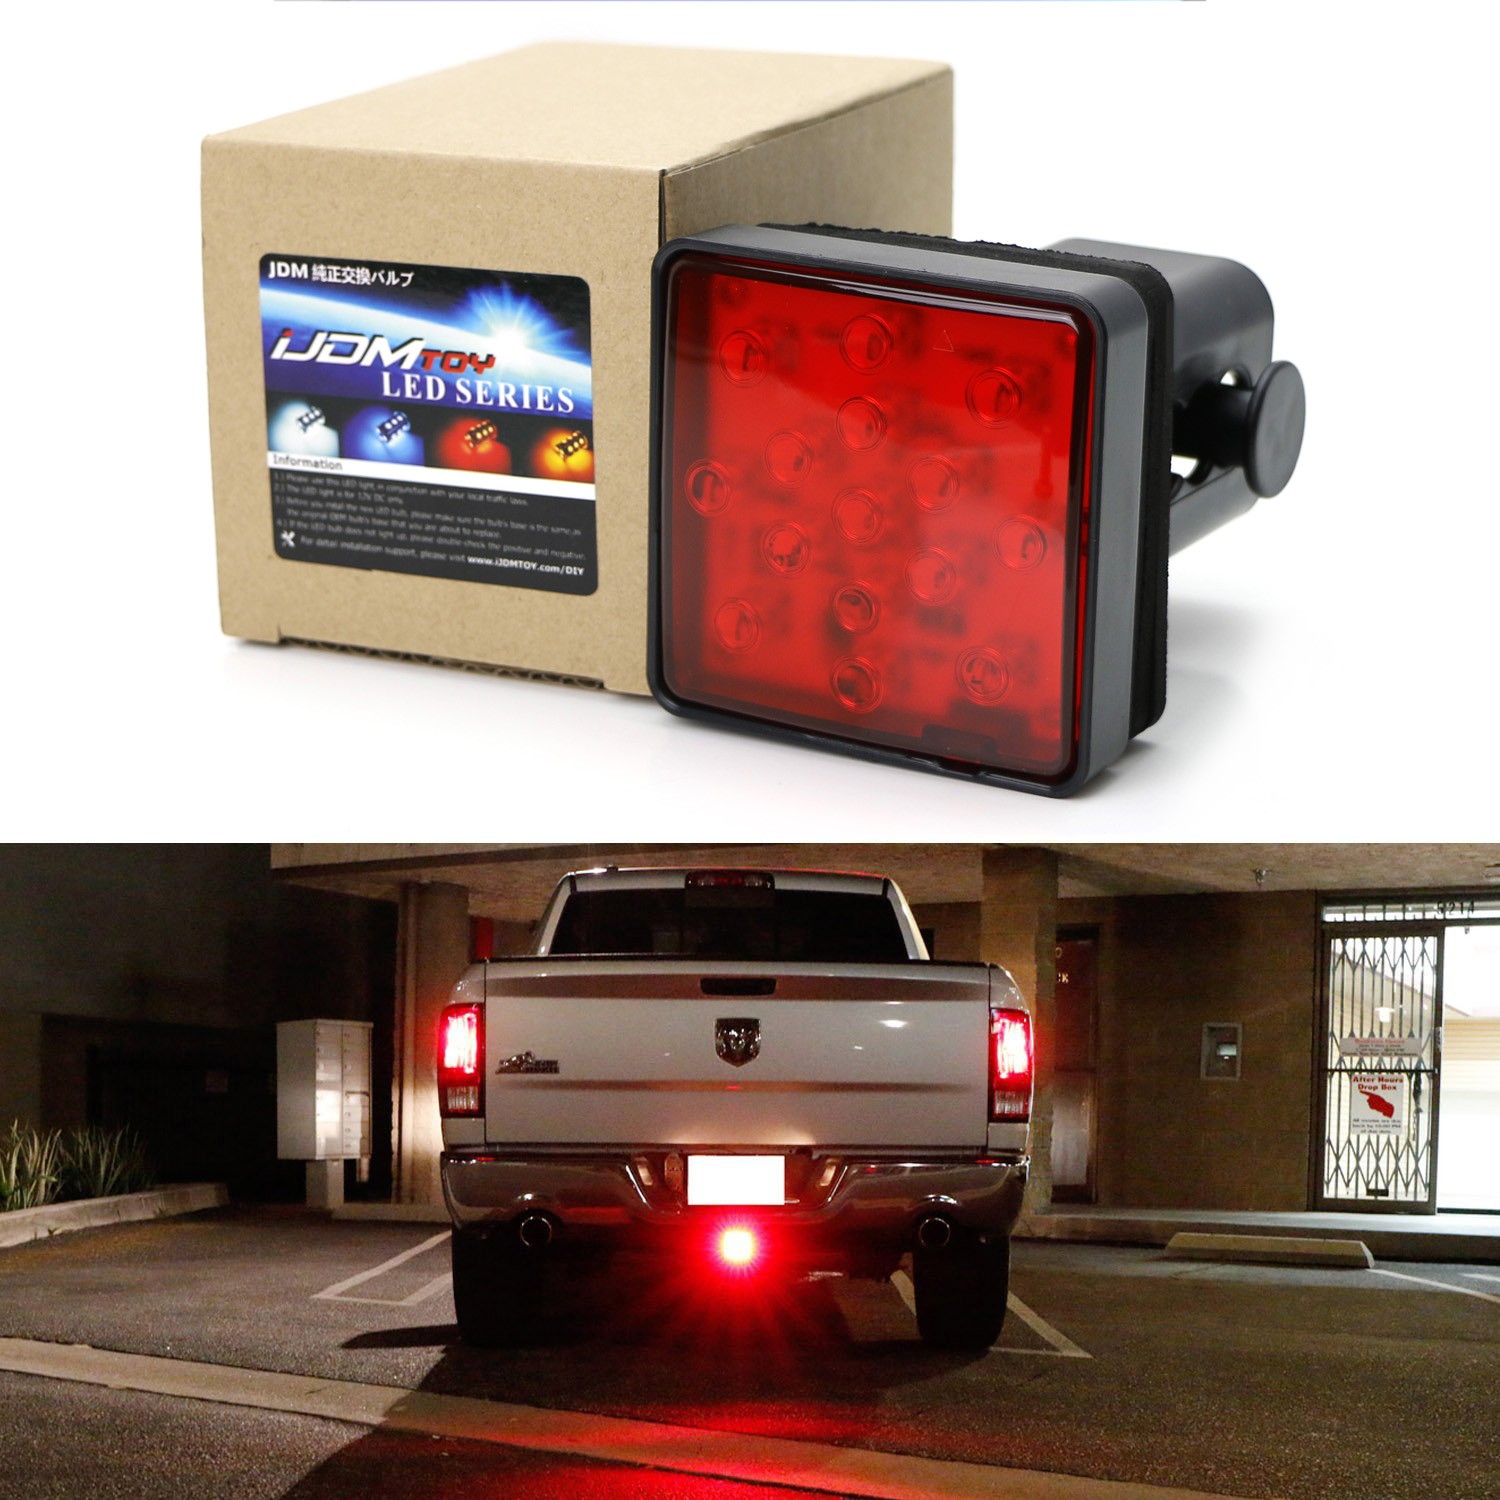 iJDMTOY Red Lens 15 LED Super Bright Brake Light Trailer Hitch Cover Fit Towing & Hauling 2" Standard Size Receiver Walmart